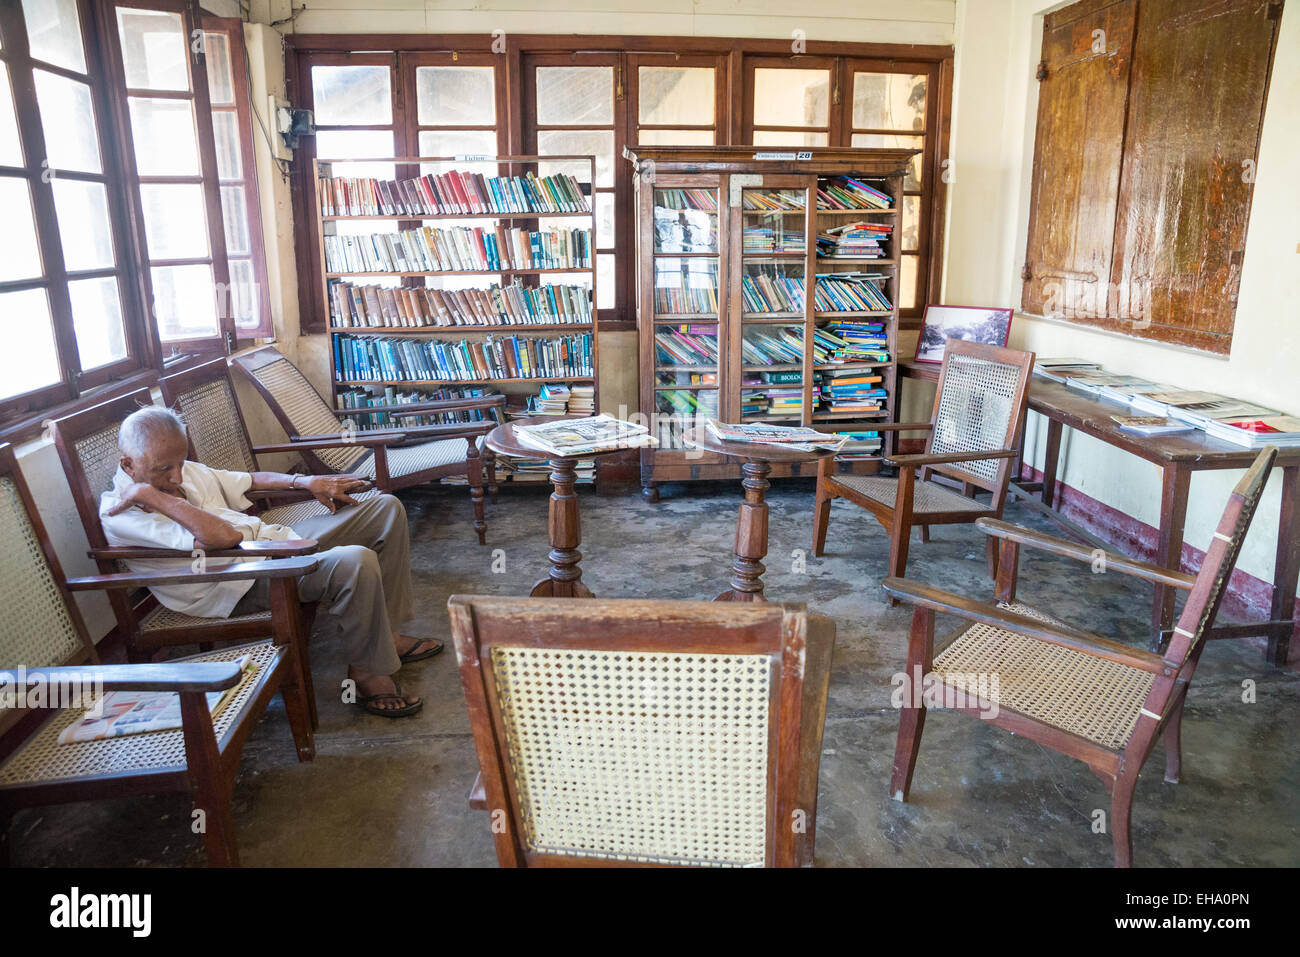 Interior in a public library in a colonial building in the fort Galle, Sri lanka, Asia Stock Photo